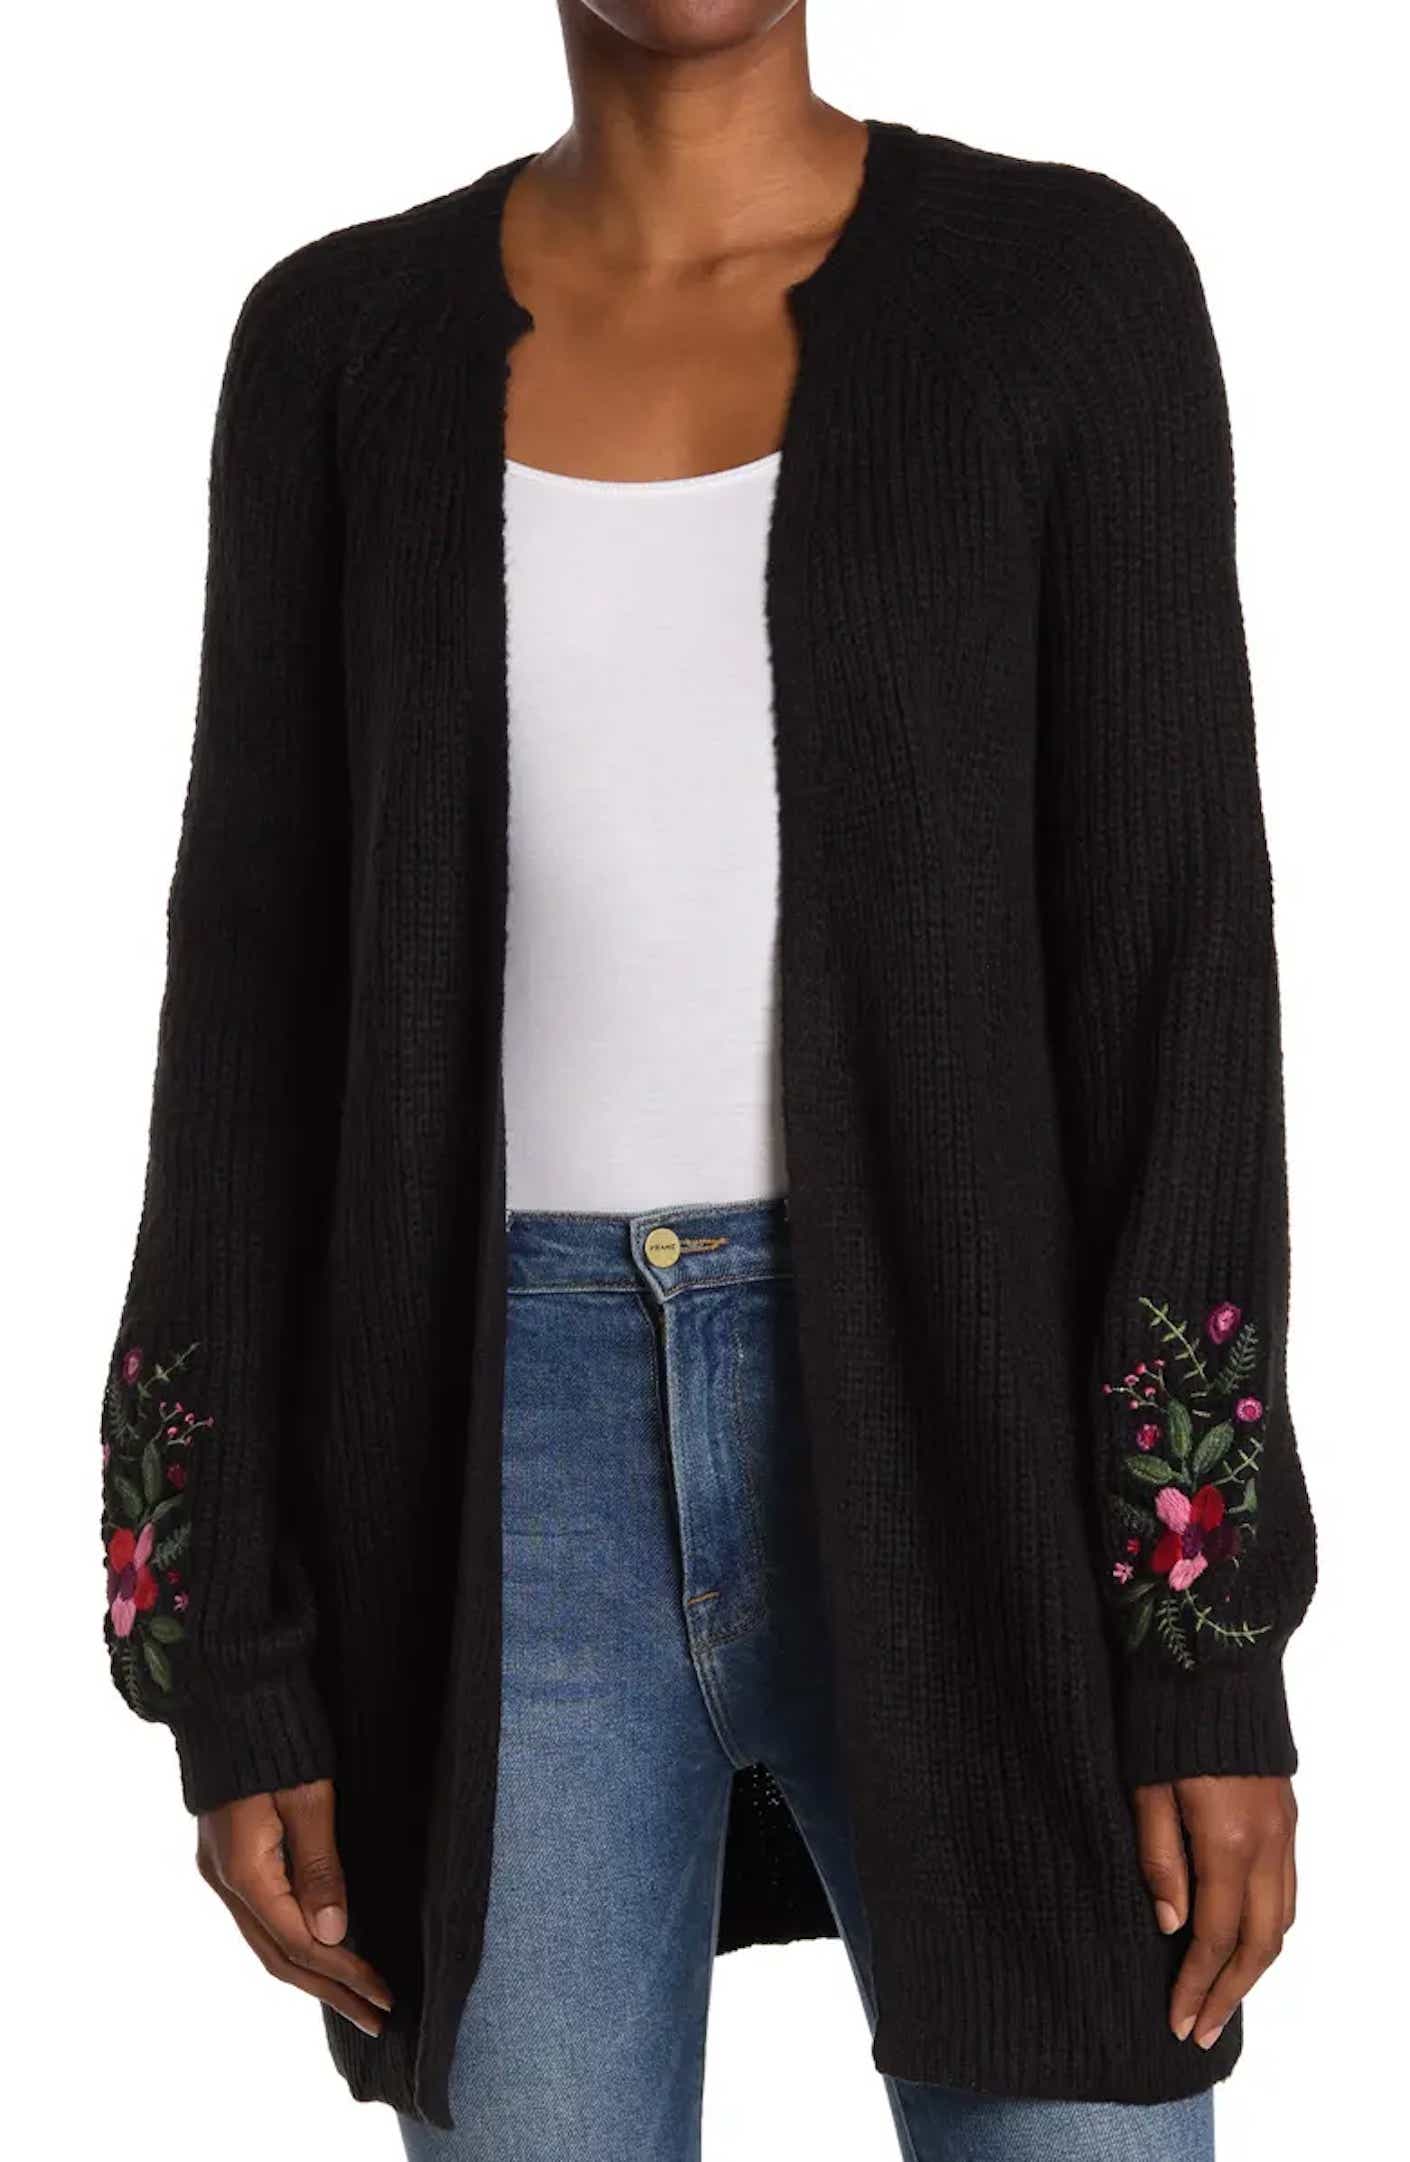 A woman wears an open front black cardigan with puffed long sleeves; the sleeves are embroidered with floral details.